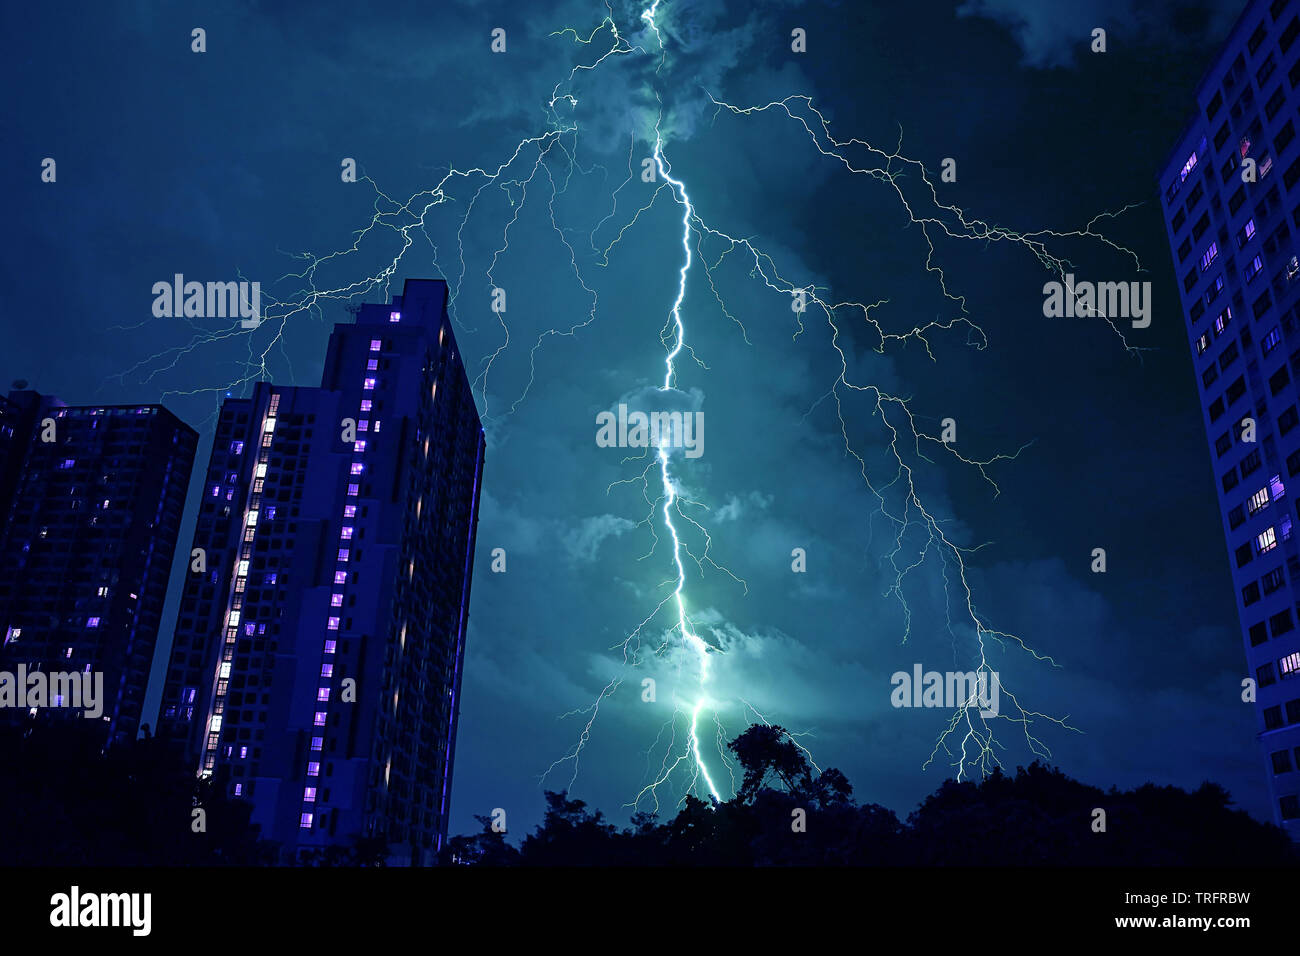 Incredible Real Lightning Striking the Night Sky in Mystique Blue Color  Stock Photo - Alamy